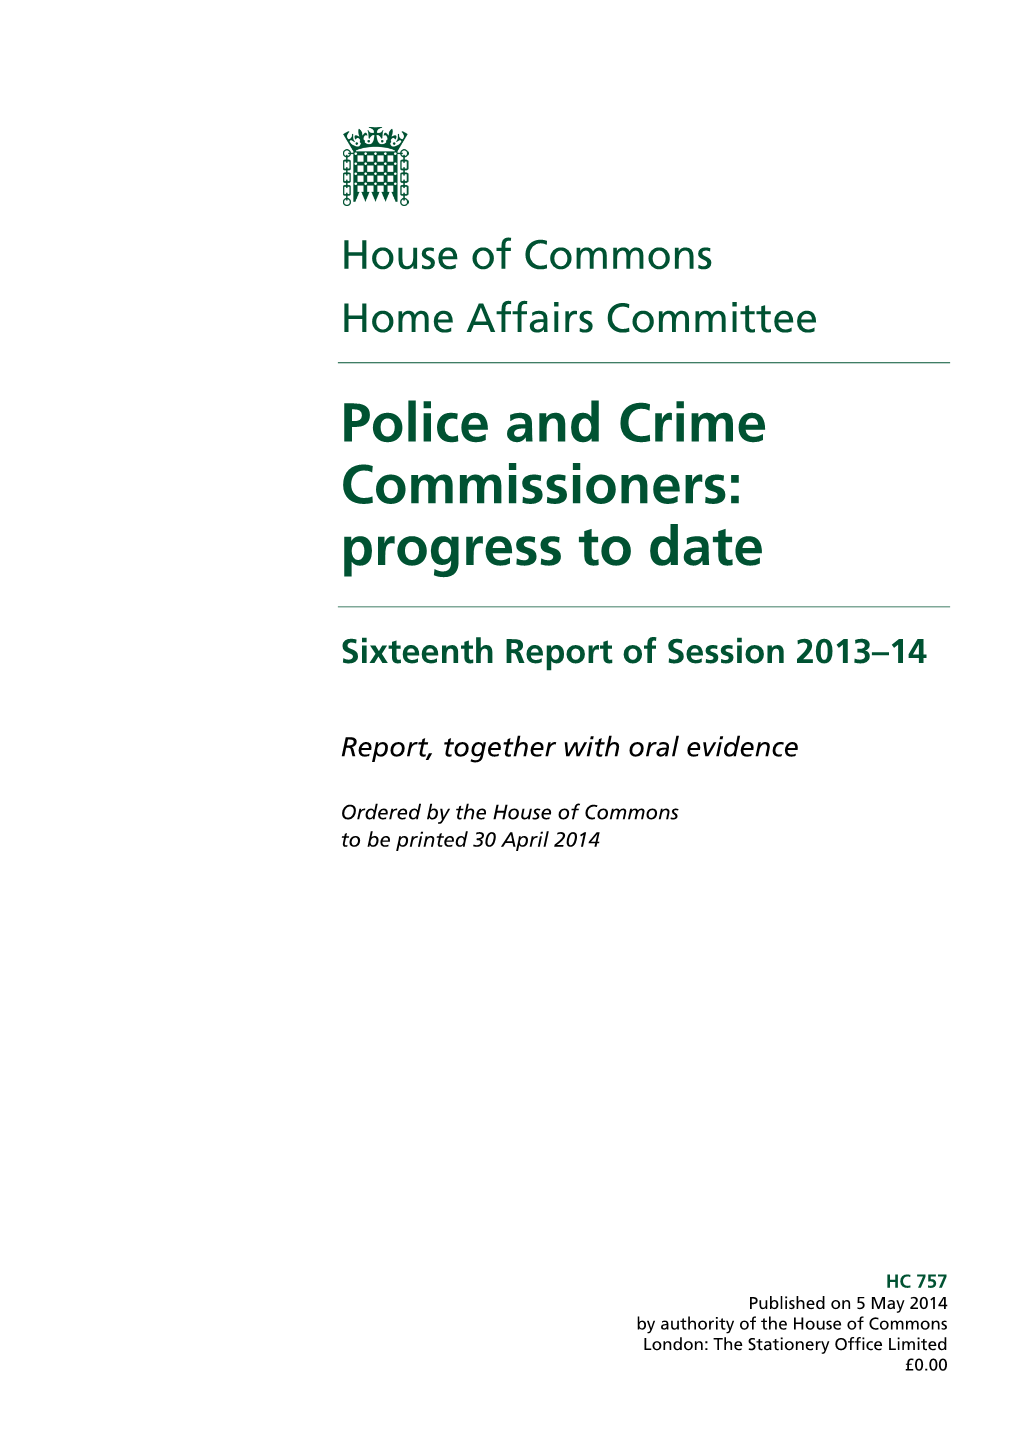 Police and Crime Commissioners: Progress to Date